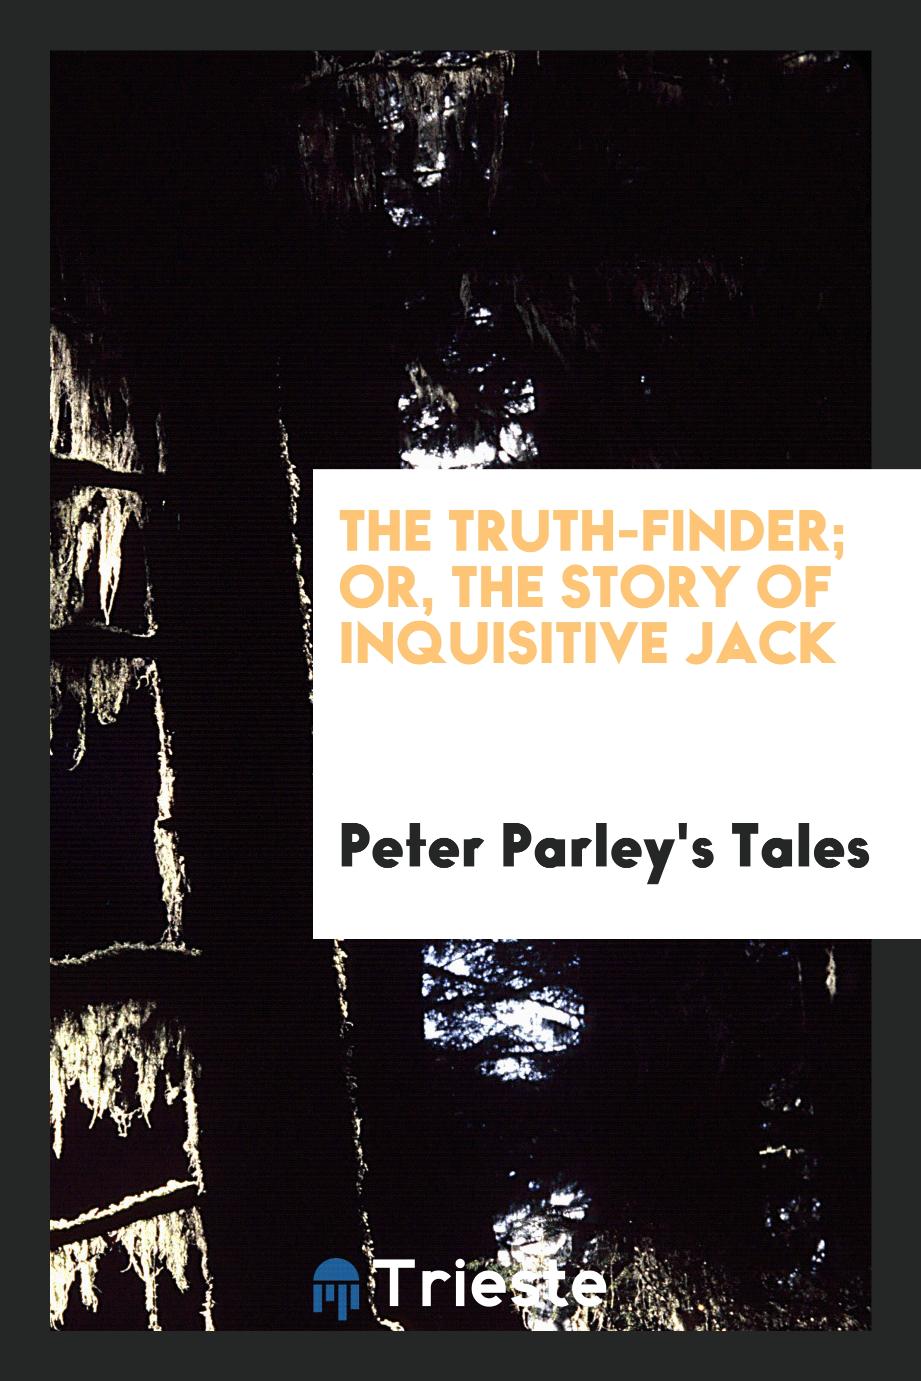 The truth-finder; or, The story of inquisitive Jack